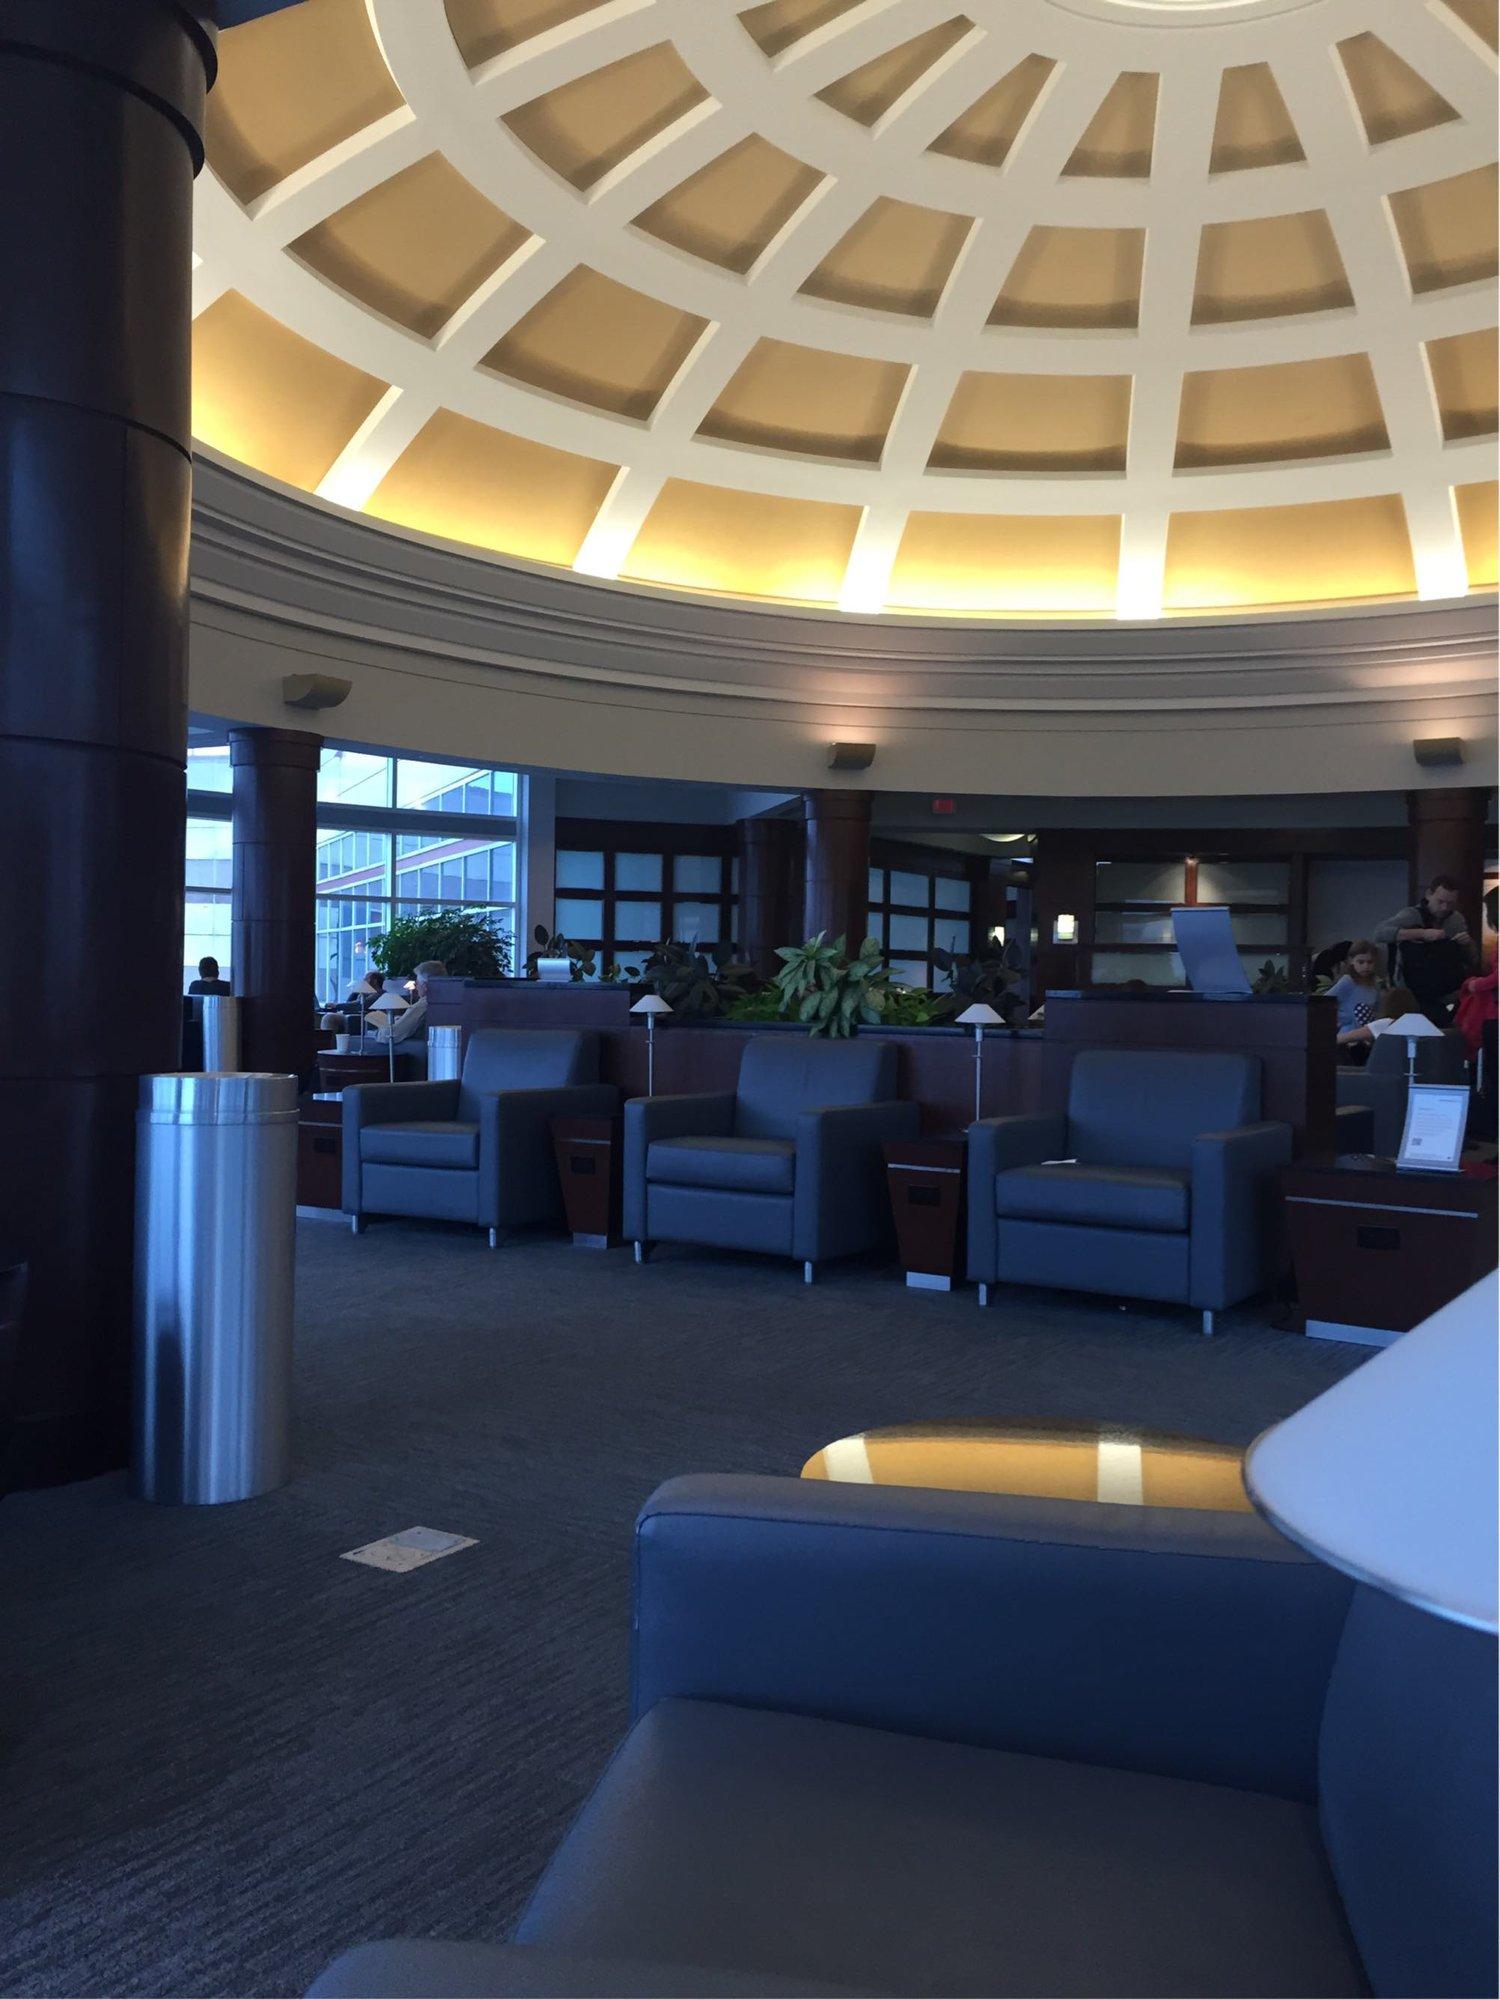 American Airlines Admirals Club image 24 of 37